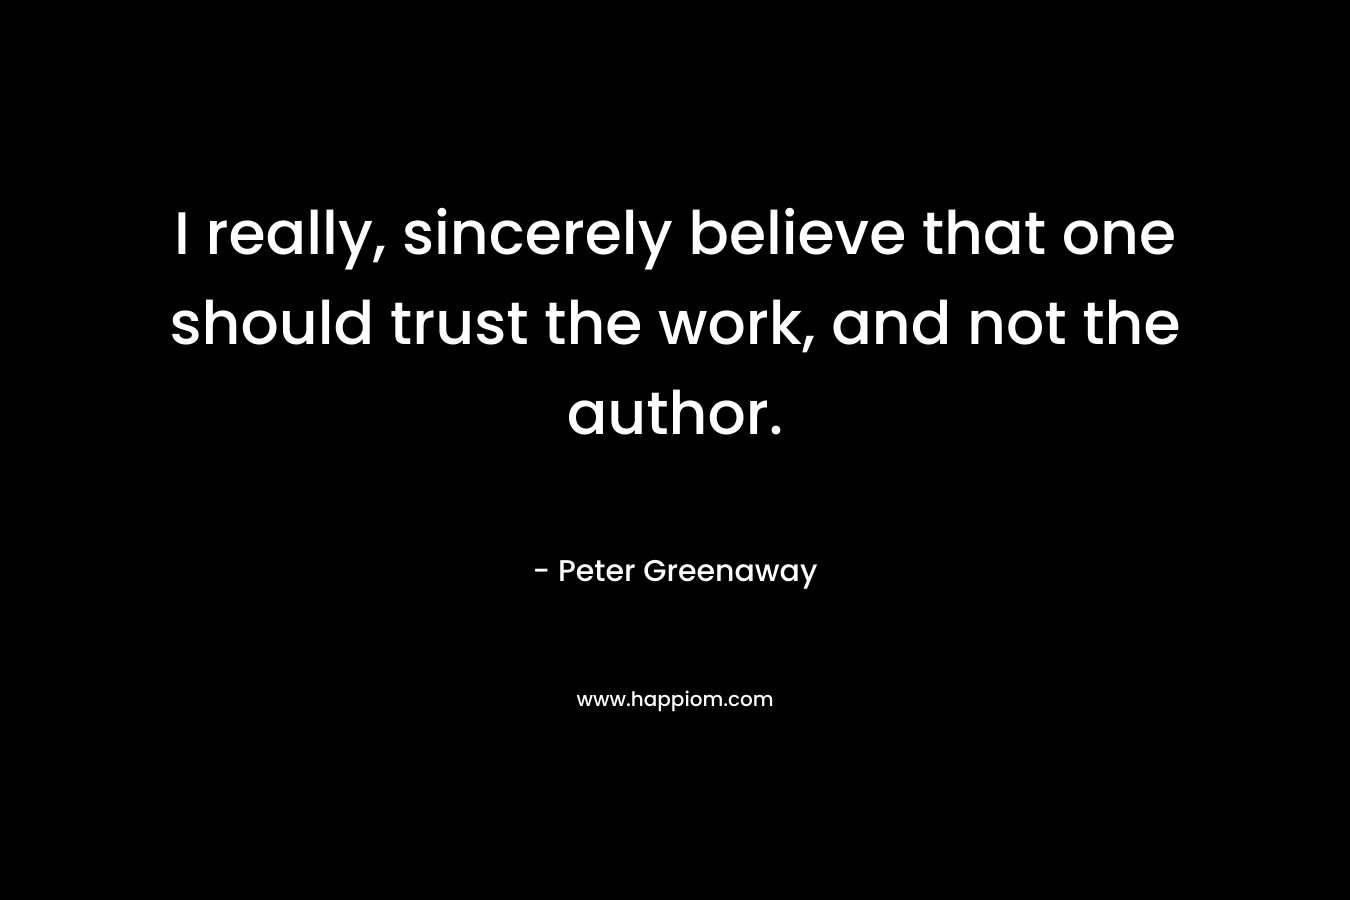 I really, sincerely believe that one should trust the work, and not the author.